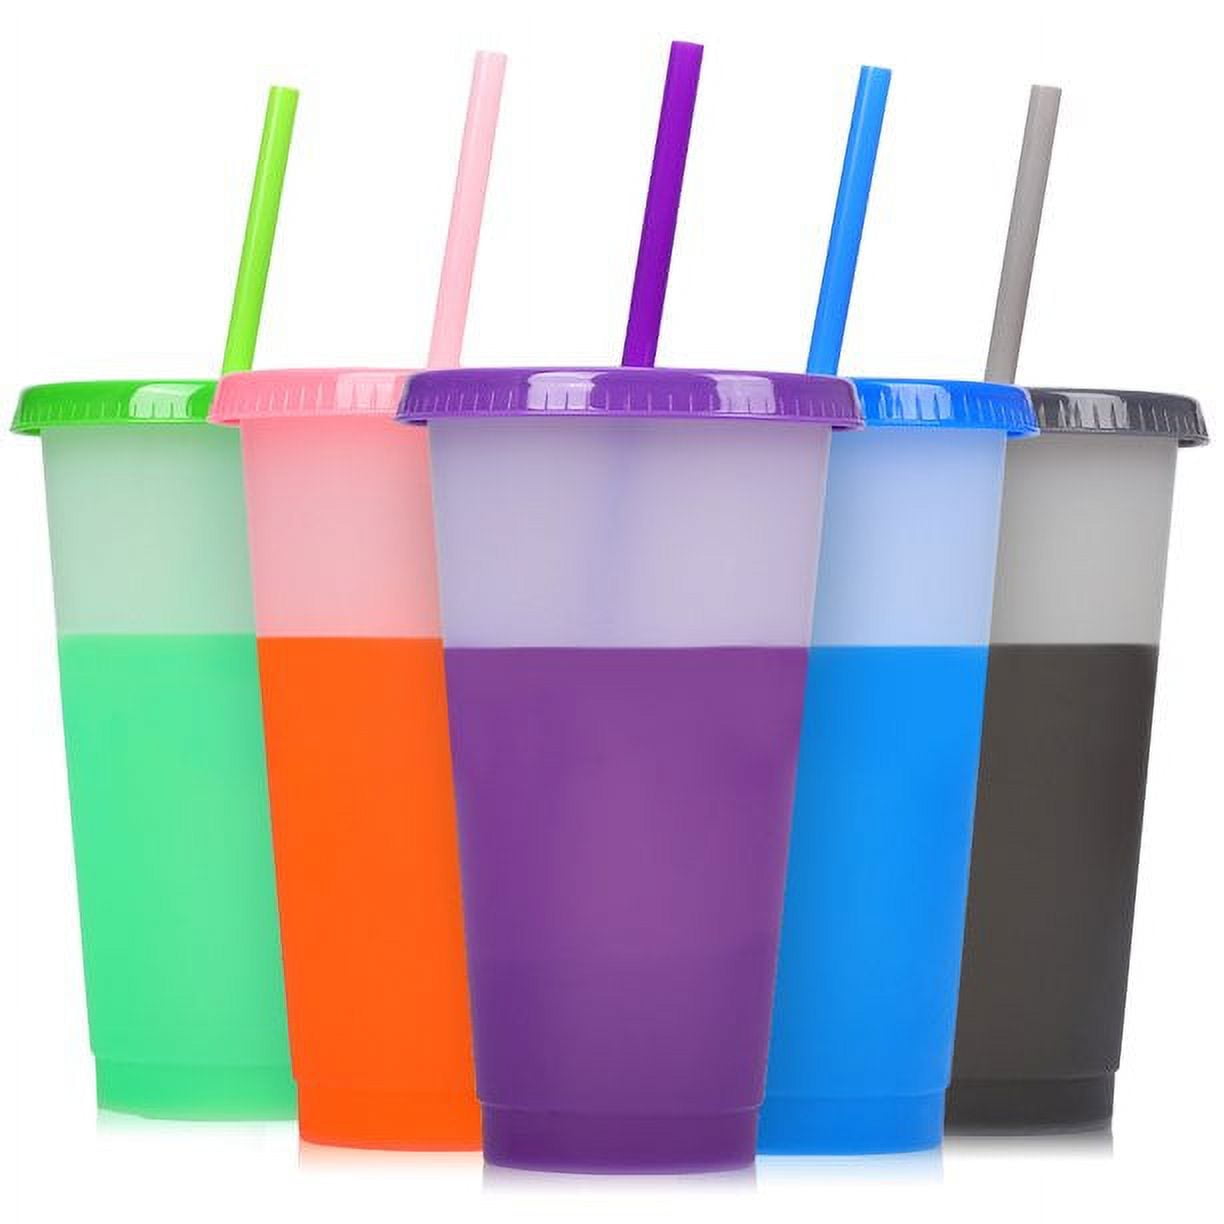 Triani Color Changing Tumbler Cups For Hot Drink - 5 Pcs 16oz Plastic  Tumblers Coffee Cups with Lids - Reusable Travel Cup to Go Coffee Cup